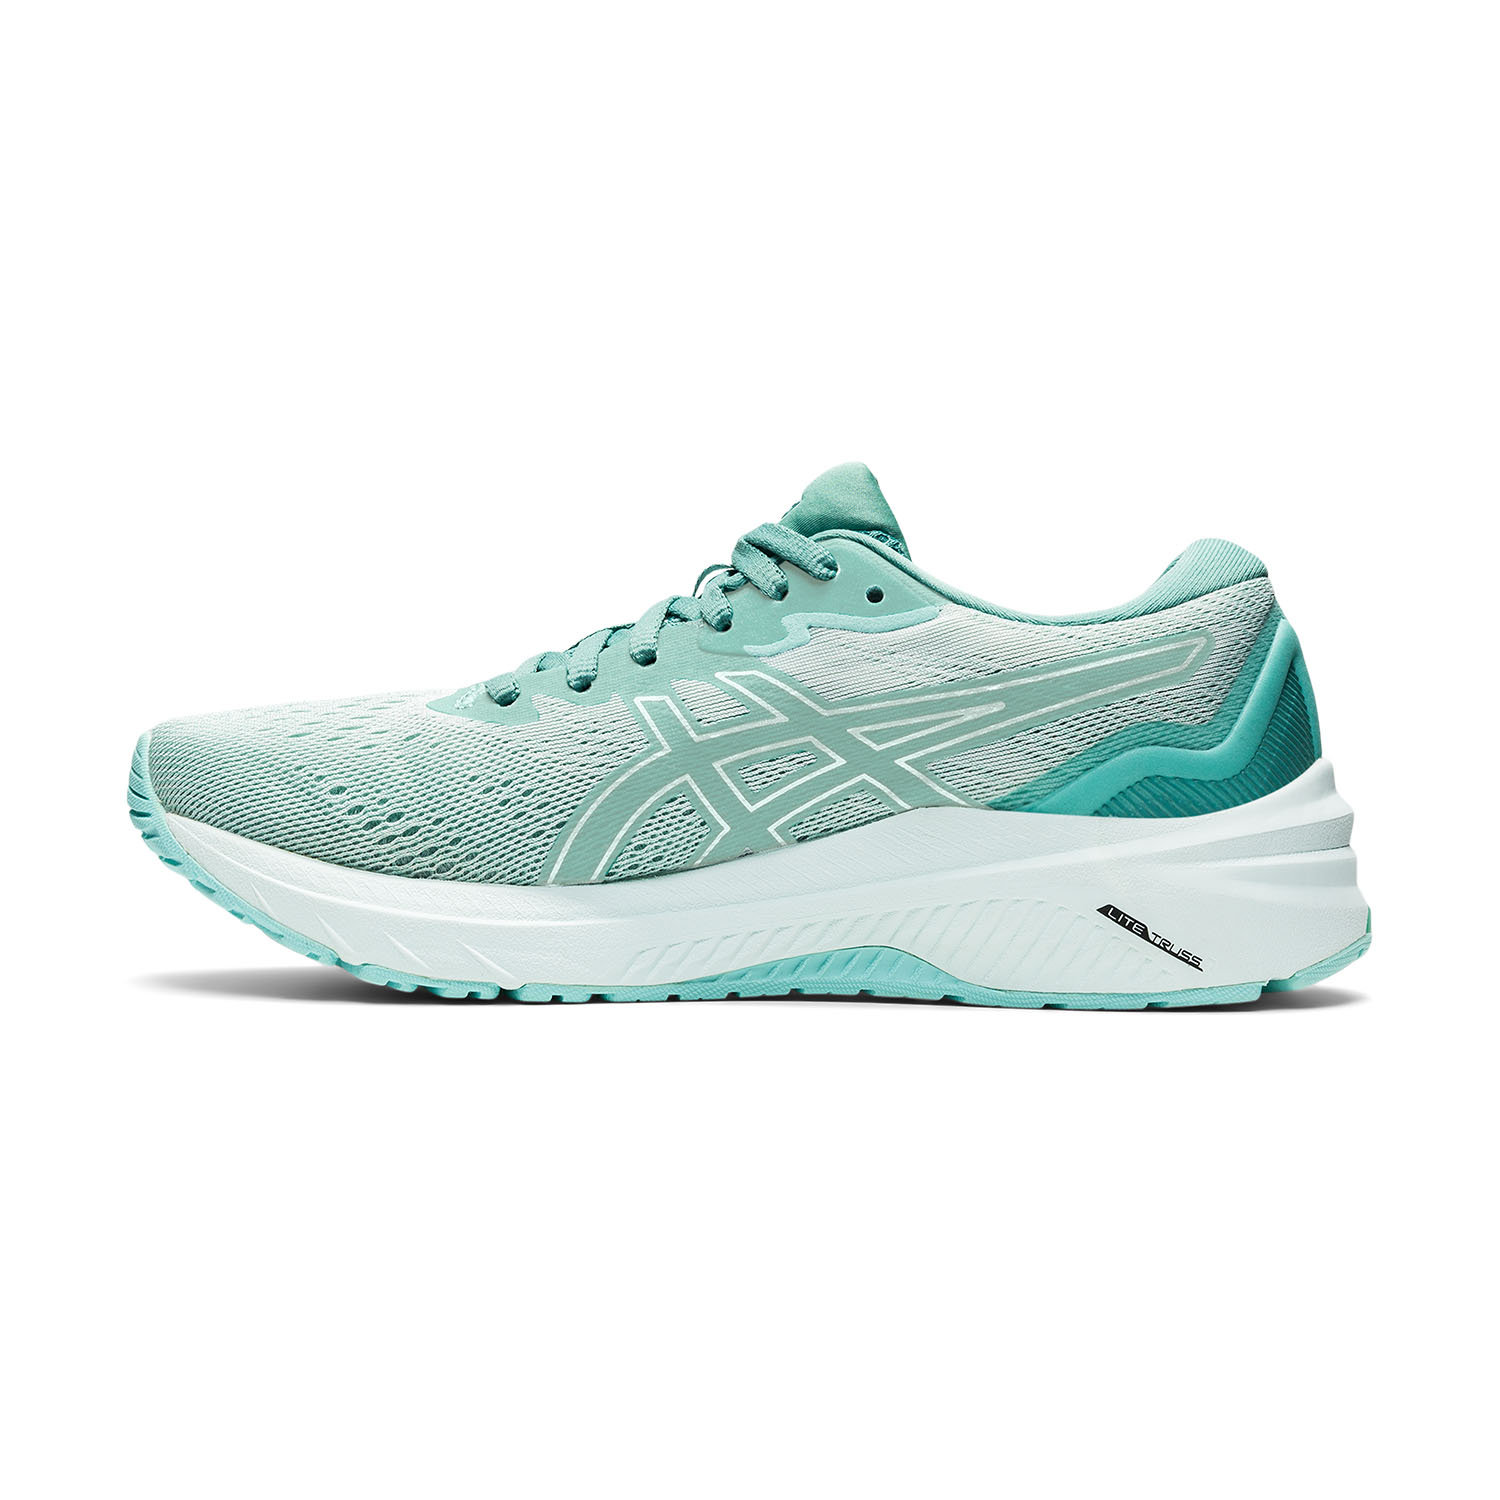 Asics GT 1000 11 Women's Running Shoes - Sage/Soothing Sea